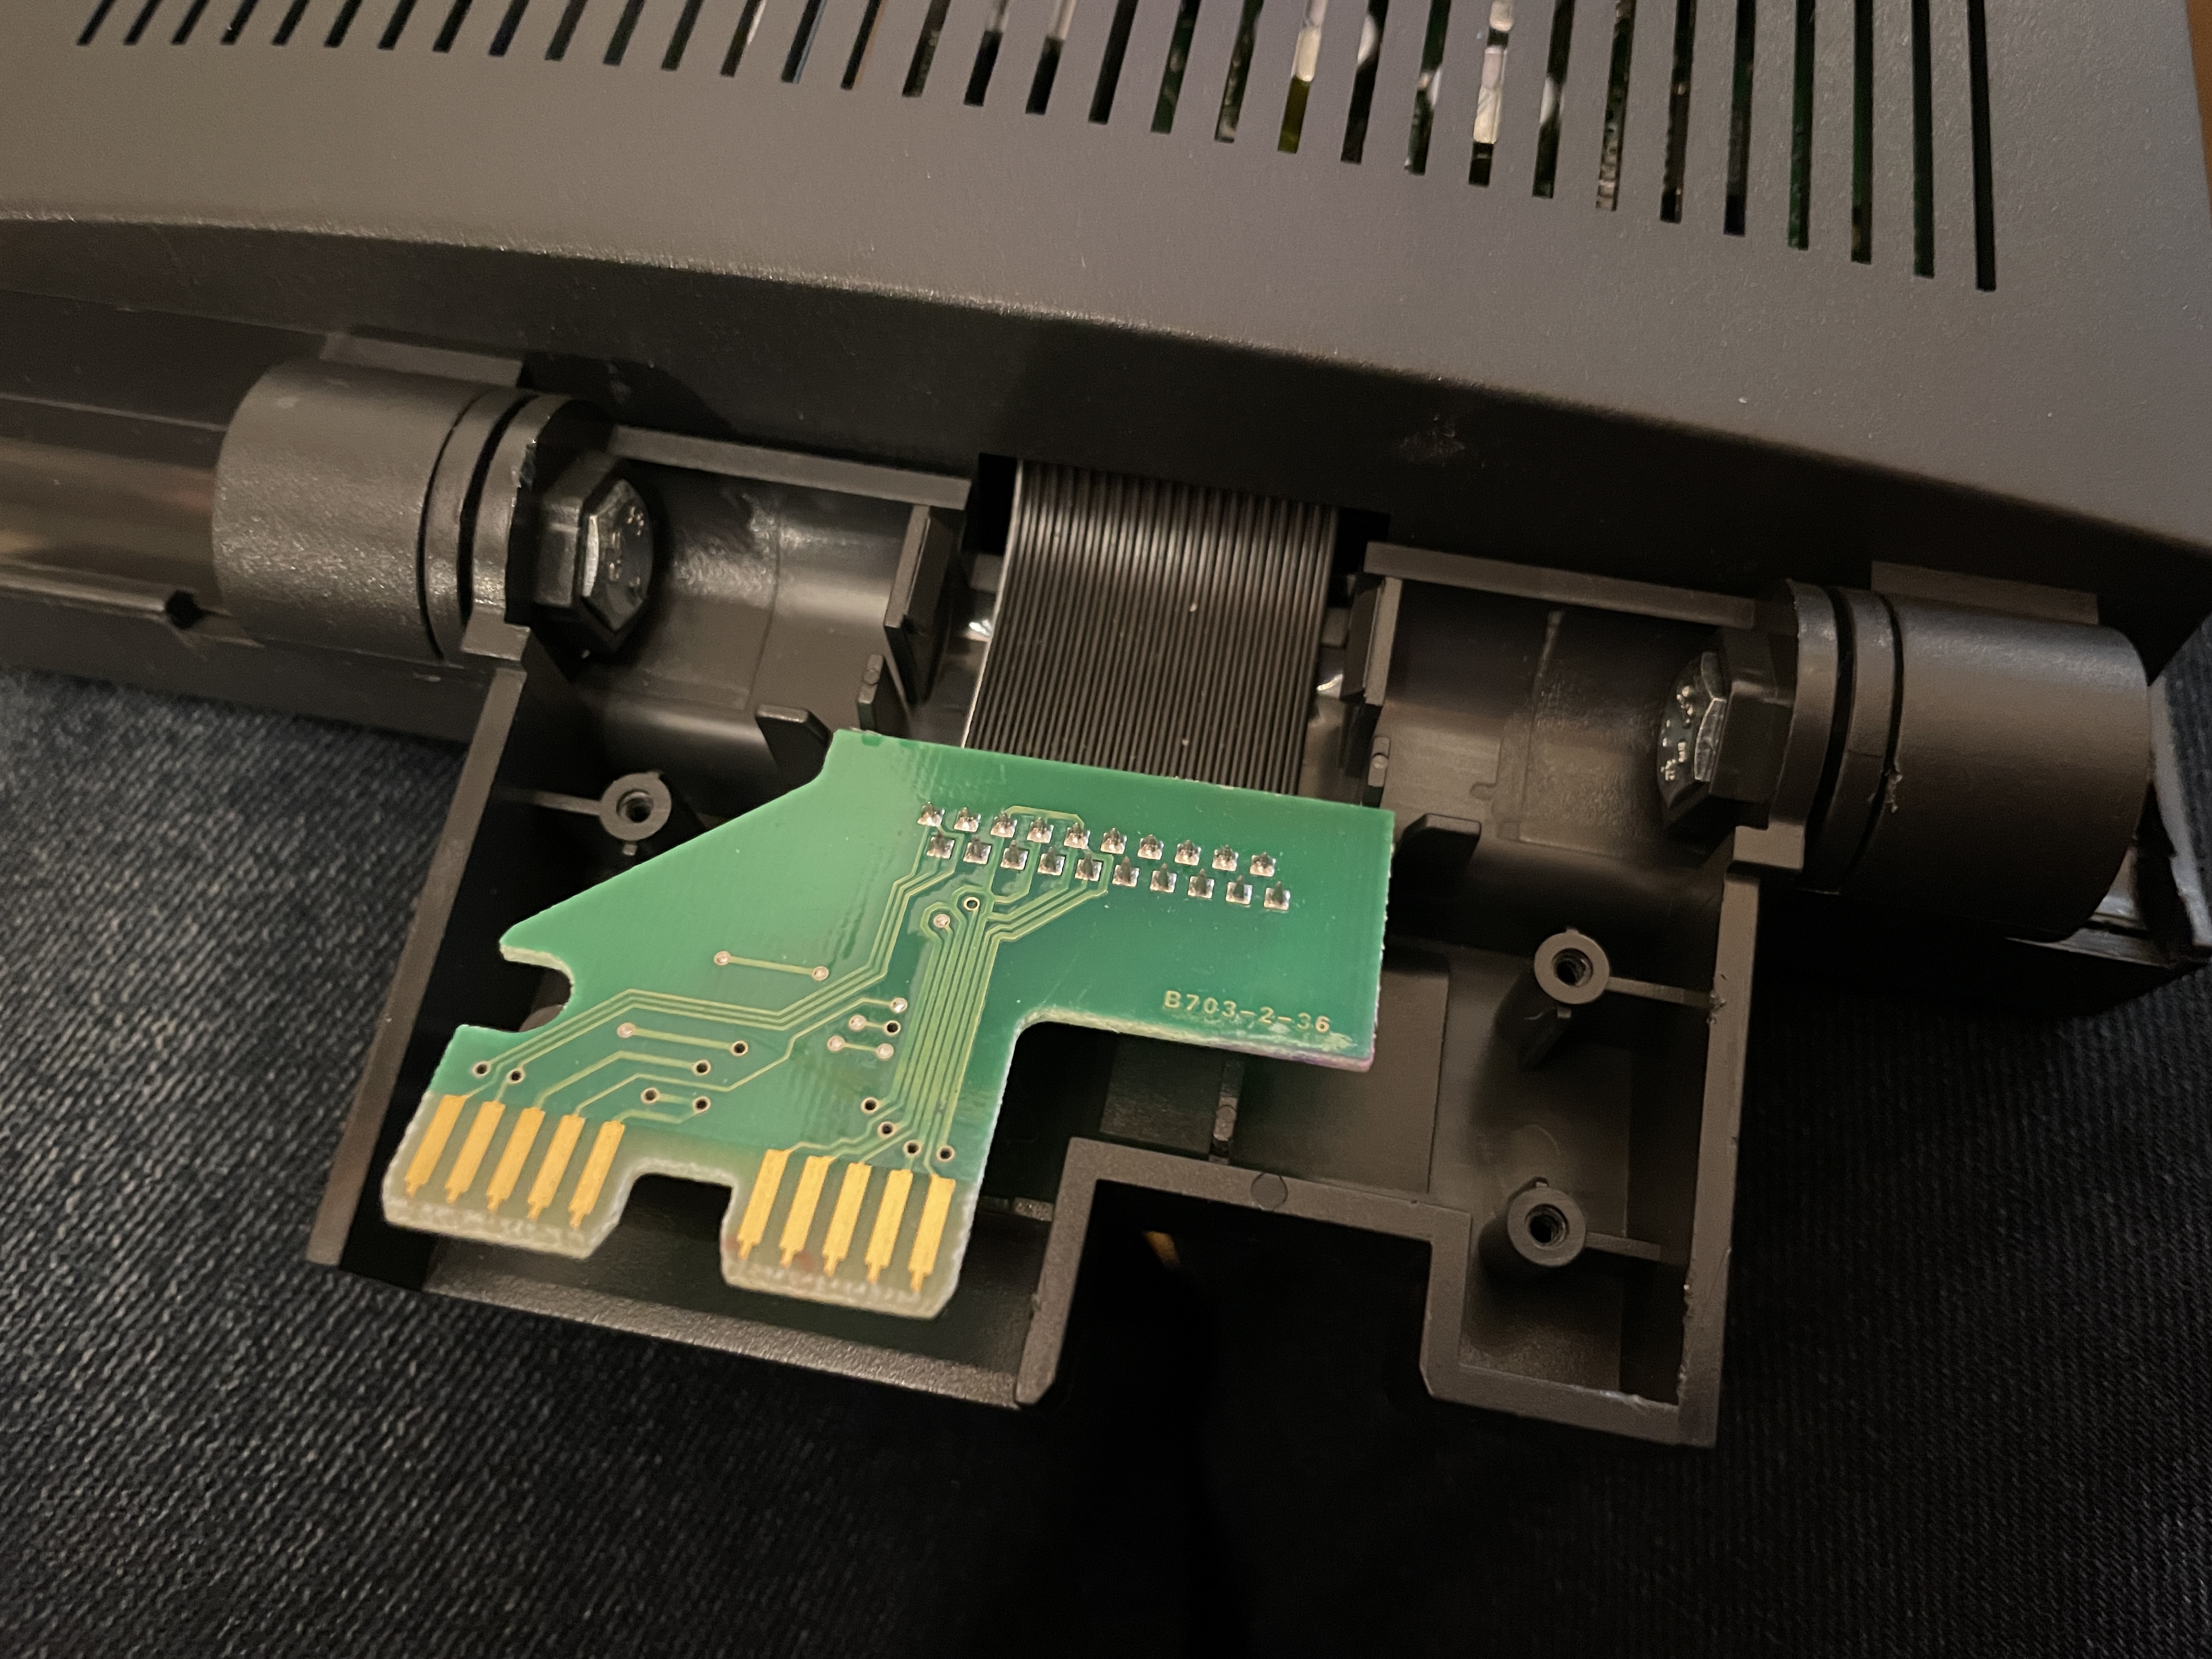 Interconnect PCB on the bottom of the display/camera unit